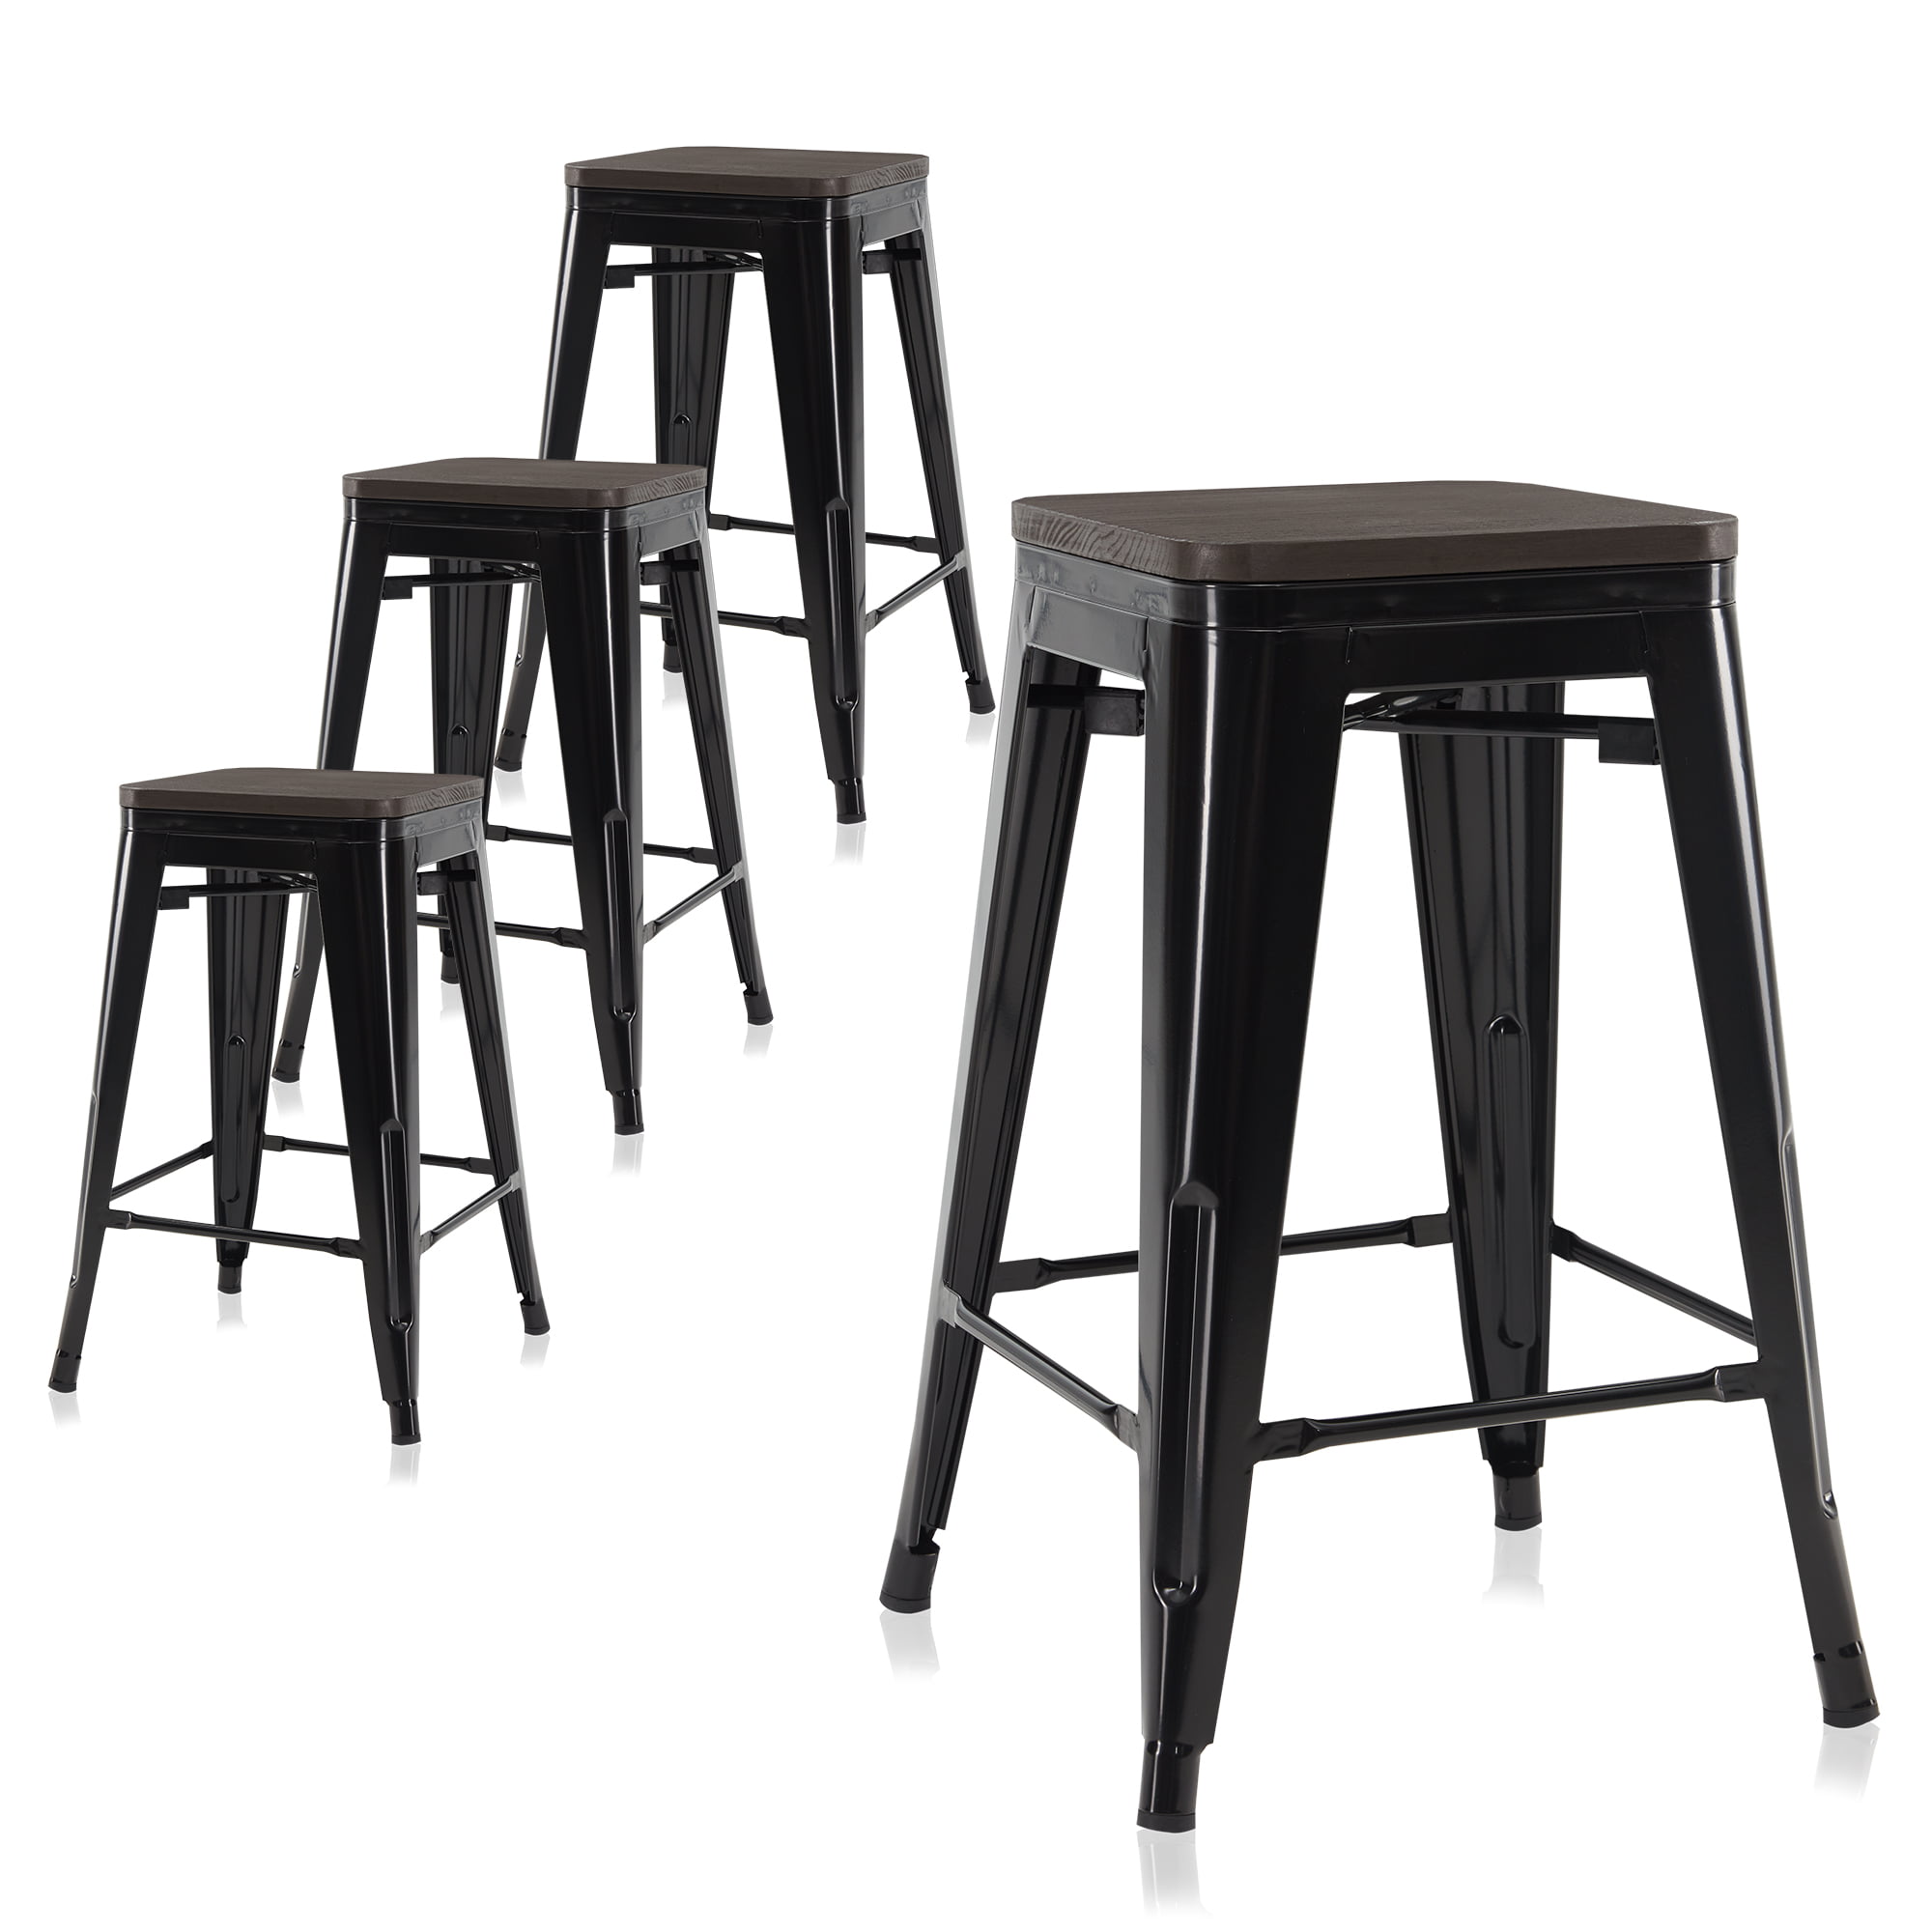 4pc Set Industrial Vintage Style Bar Height Stool with Full Back 30"inch Black 